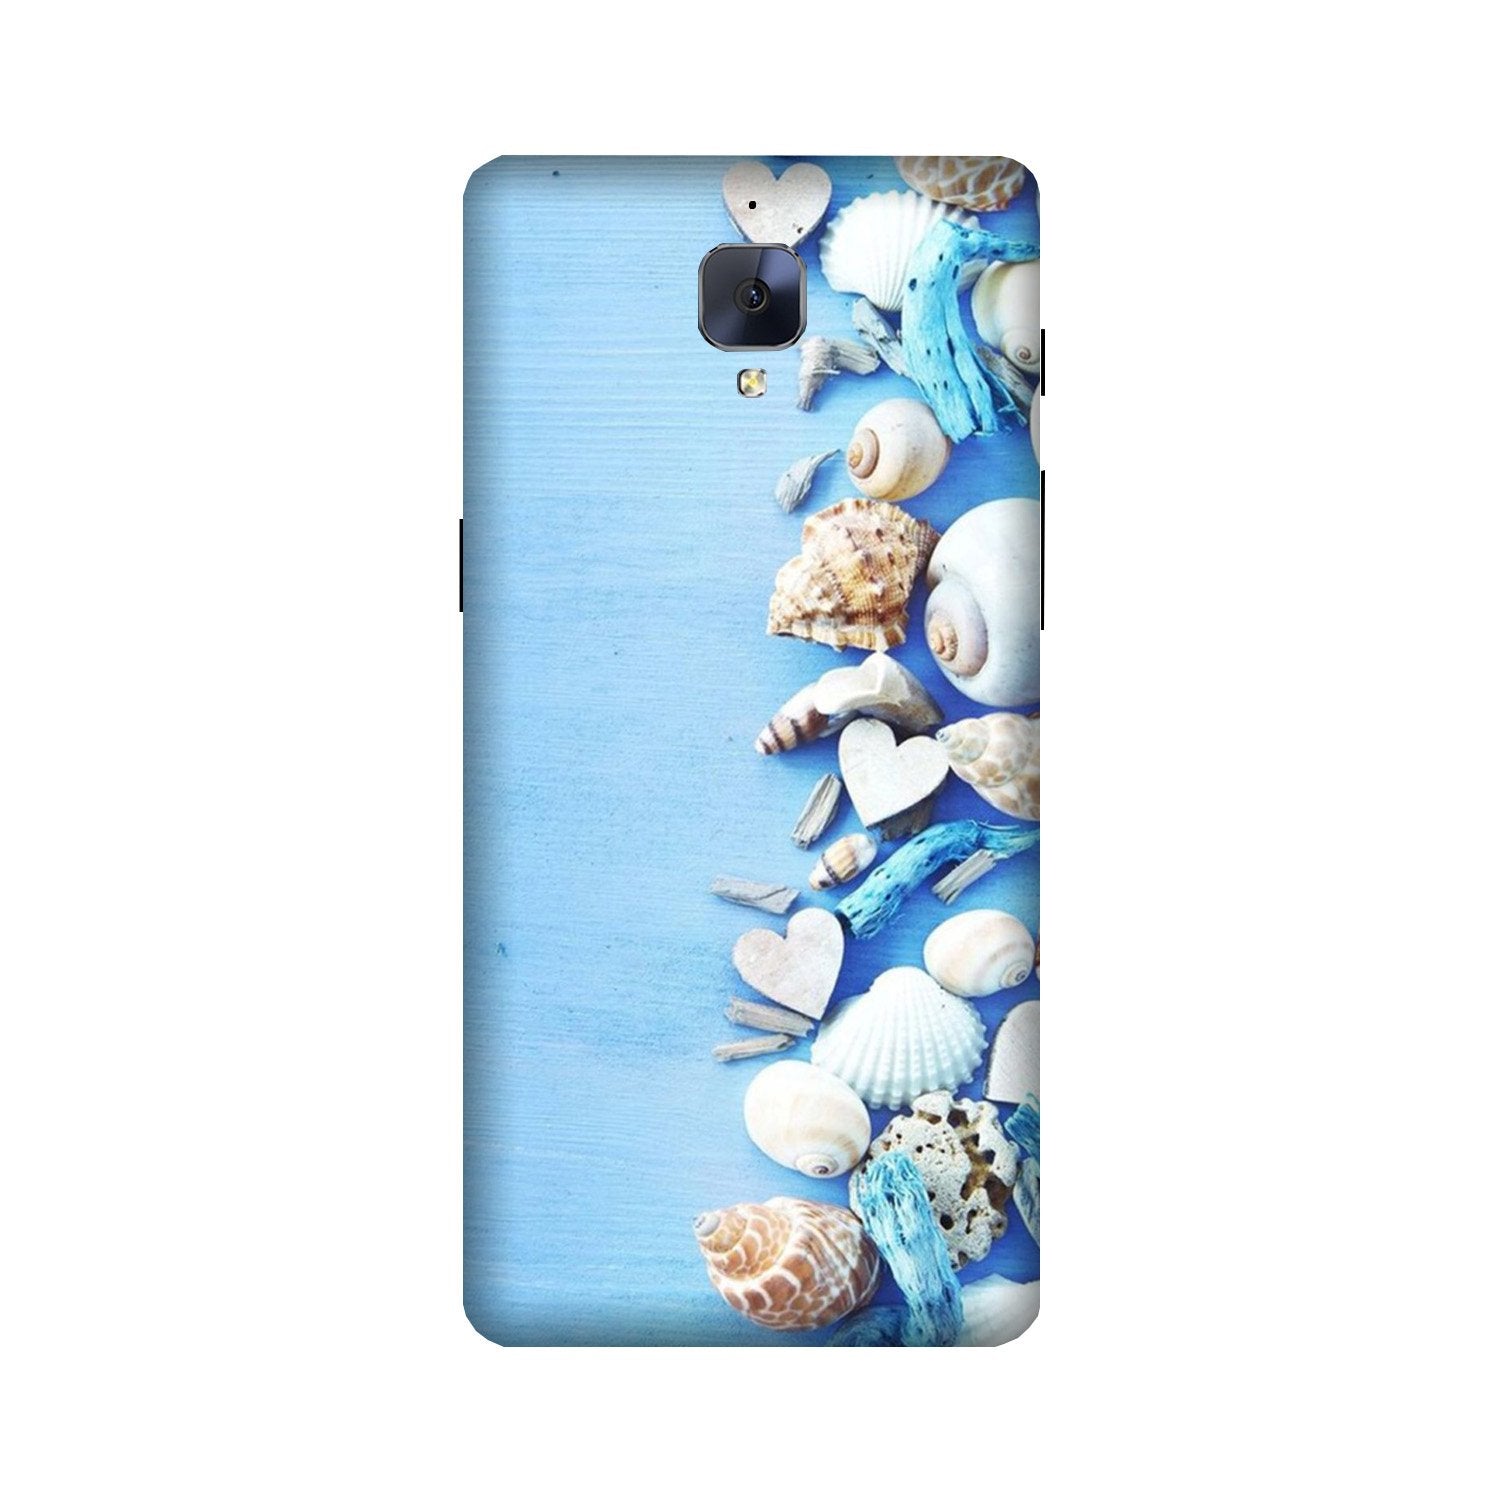 Sea Shells2 Case for OnePlus 3/ 3T